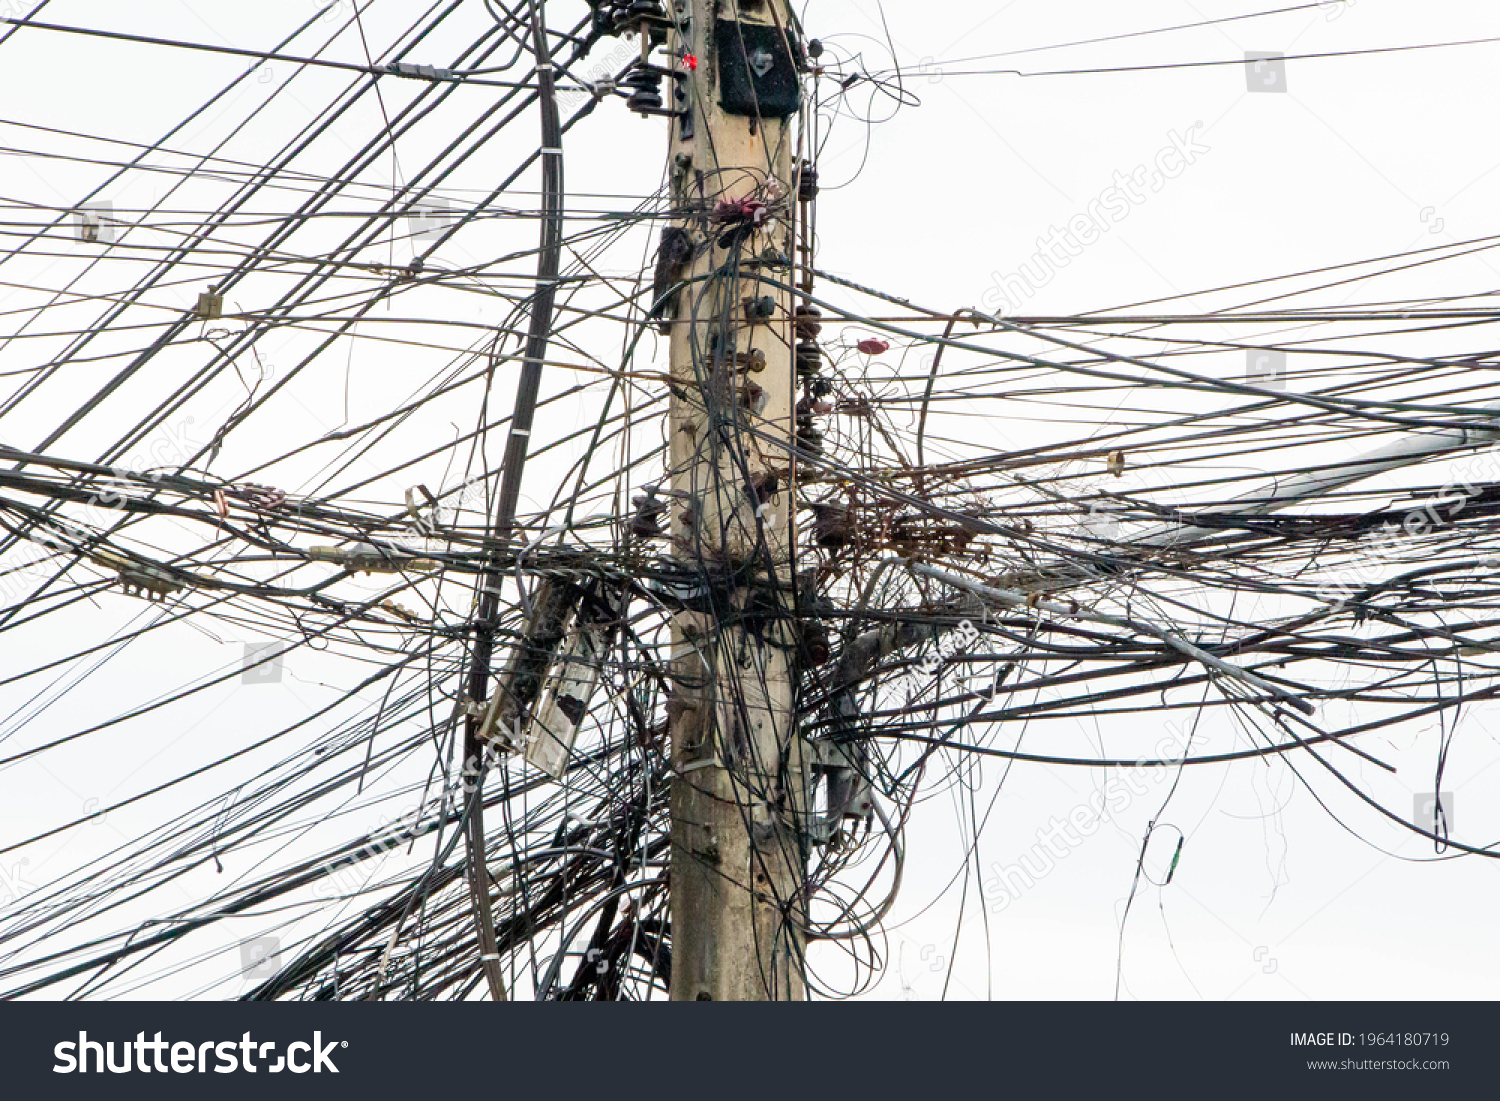 messy electricity wires on the pole, The chaos of cables and wires on an electric pole in Thailand #1964180719